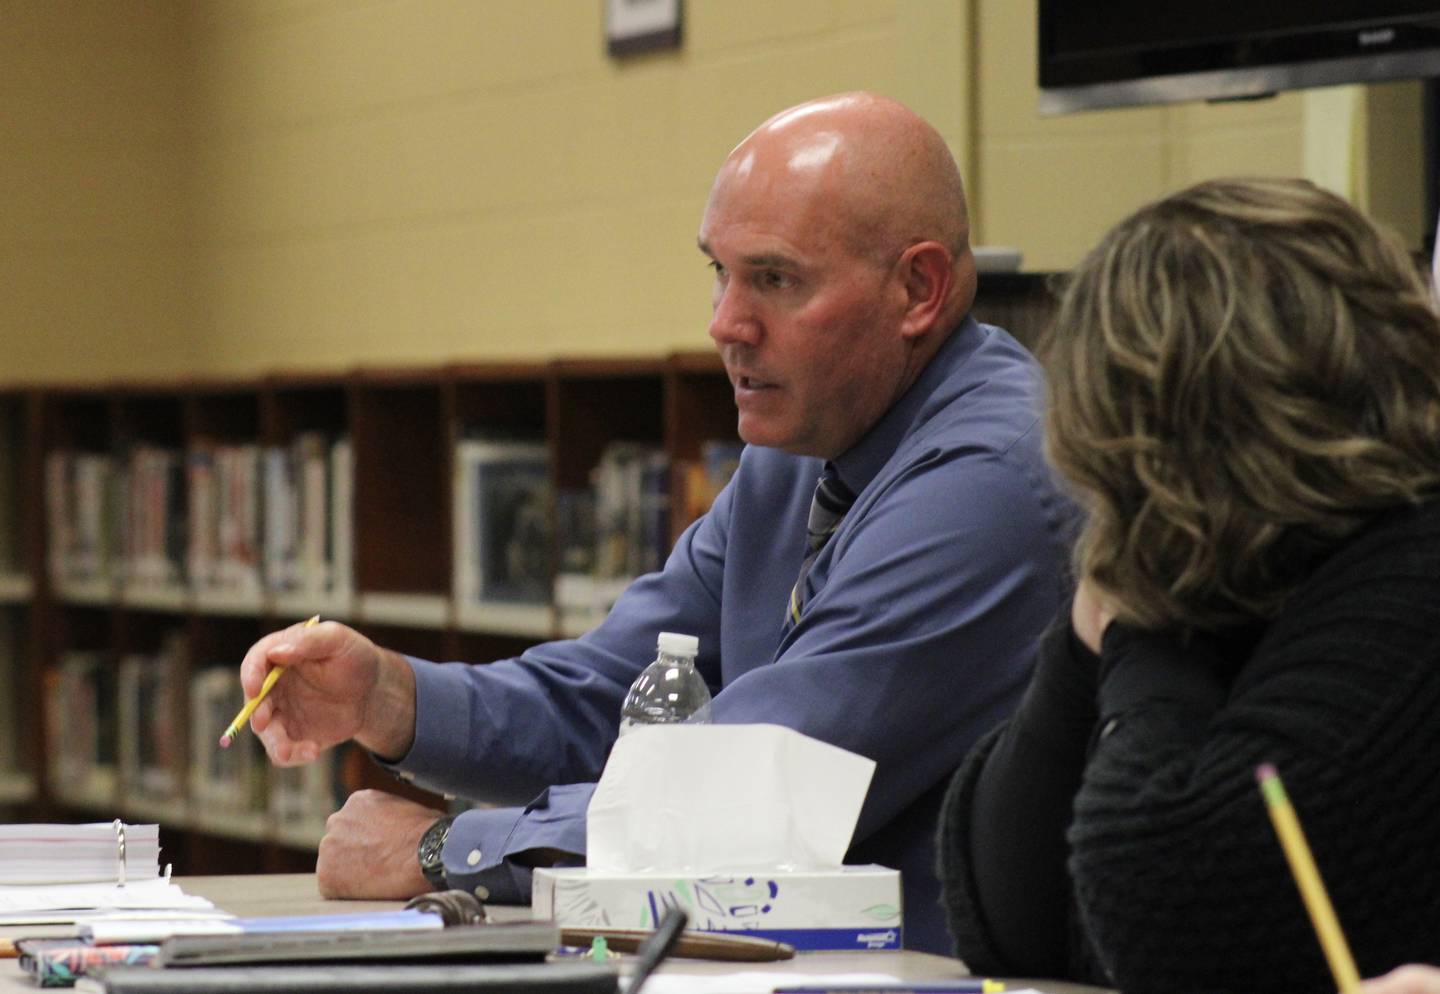 In a file photo from March 23, 2022, Sterling Public Schools Superintendent Tad Everett takes part in a discussion at a board of education meeting. He was interviewed  about student safety in the context of active shooters and other emergencies in the aftermath of the Uvalde, Texas shooting.